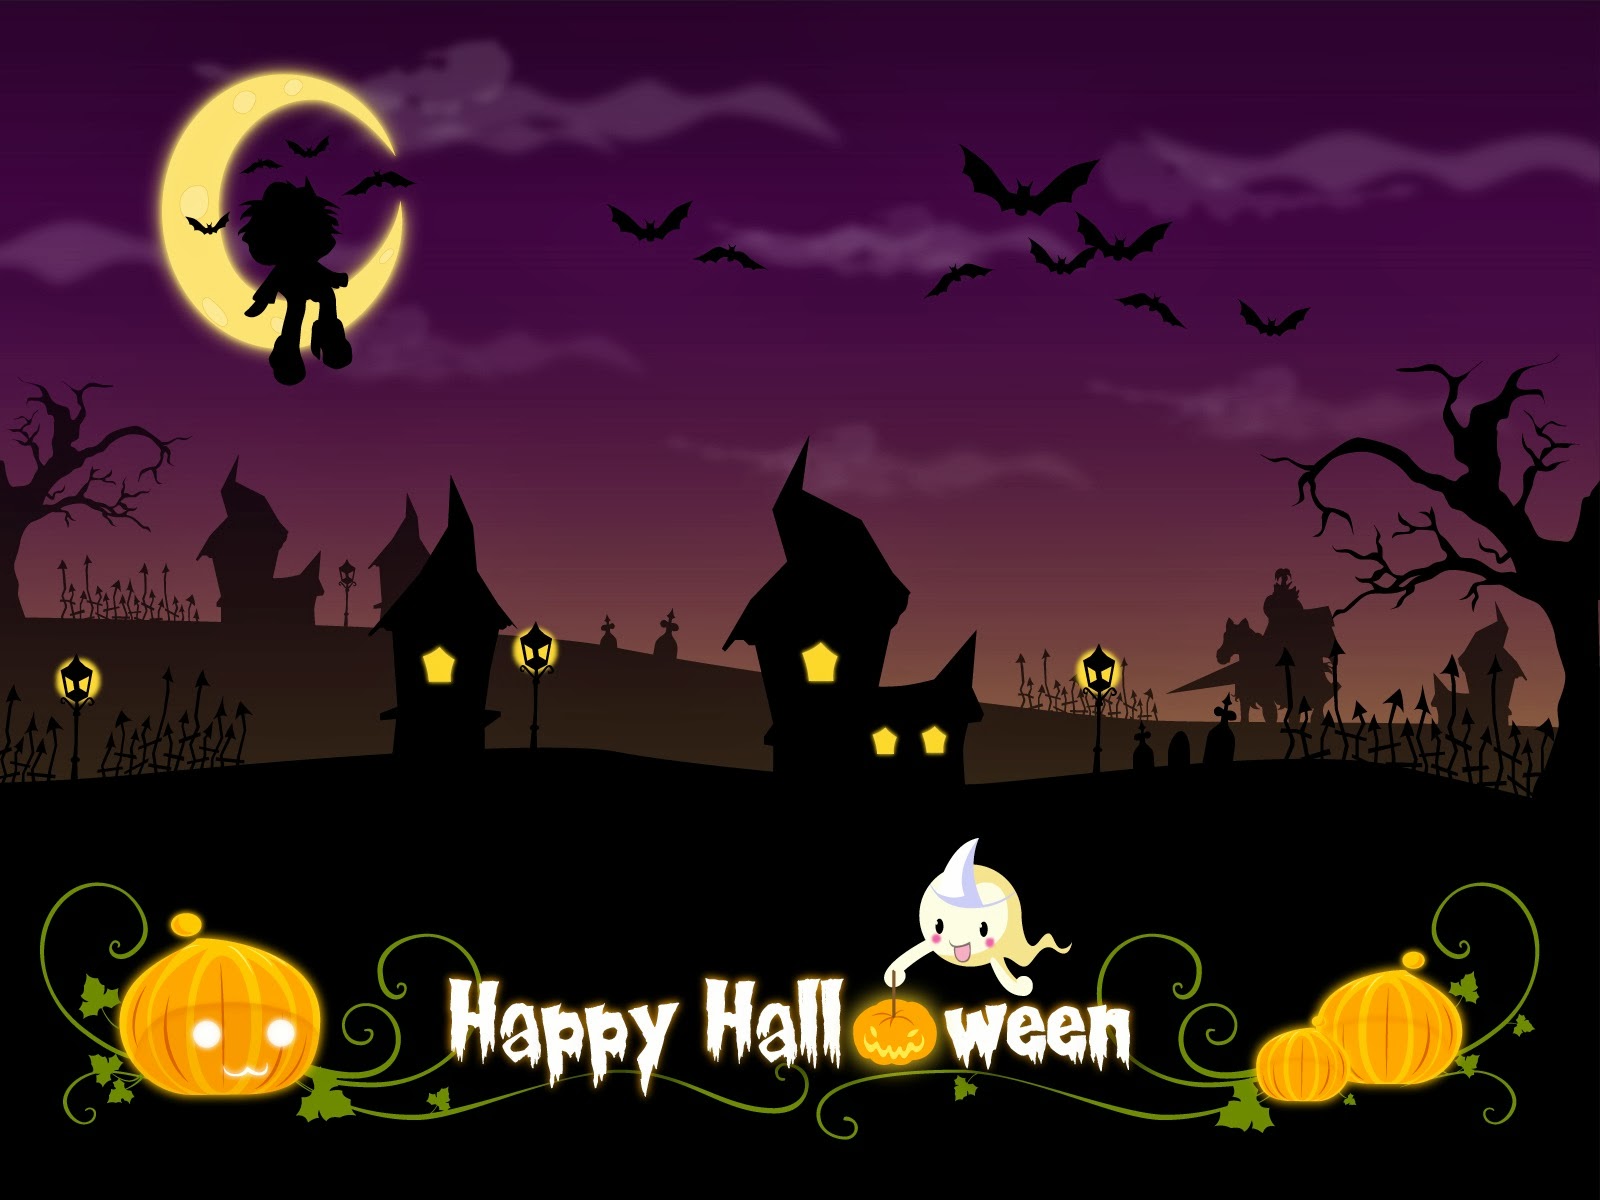 Best HD Photo Images of Happy Halloween Wishes | Festival Chaska